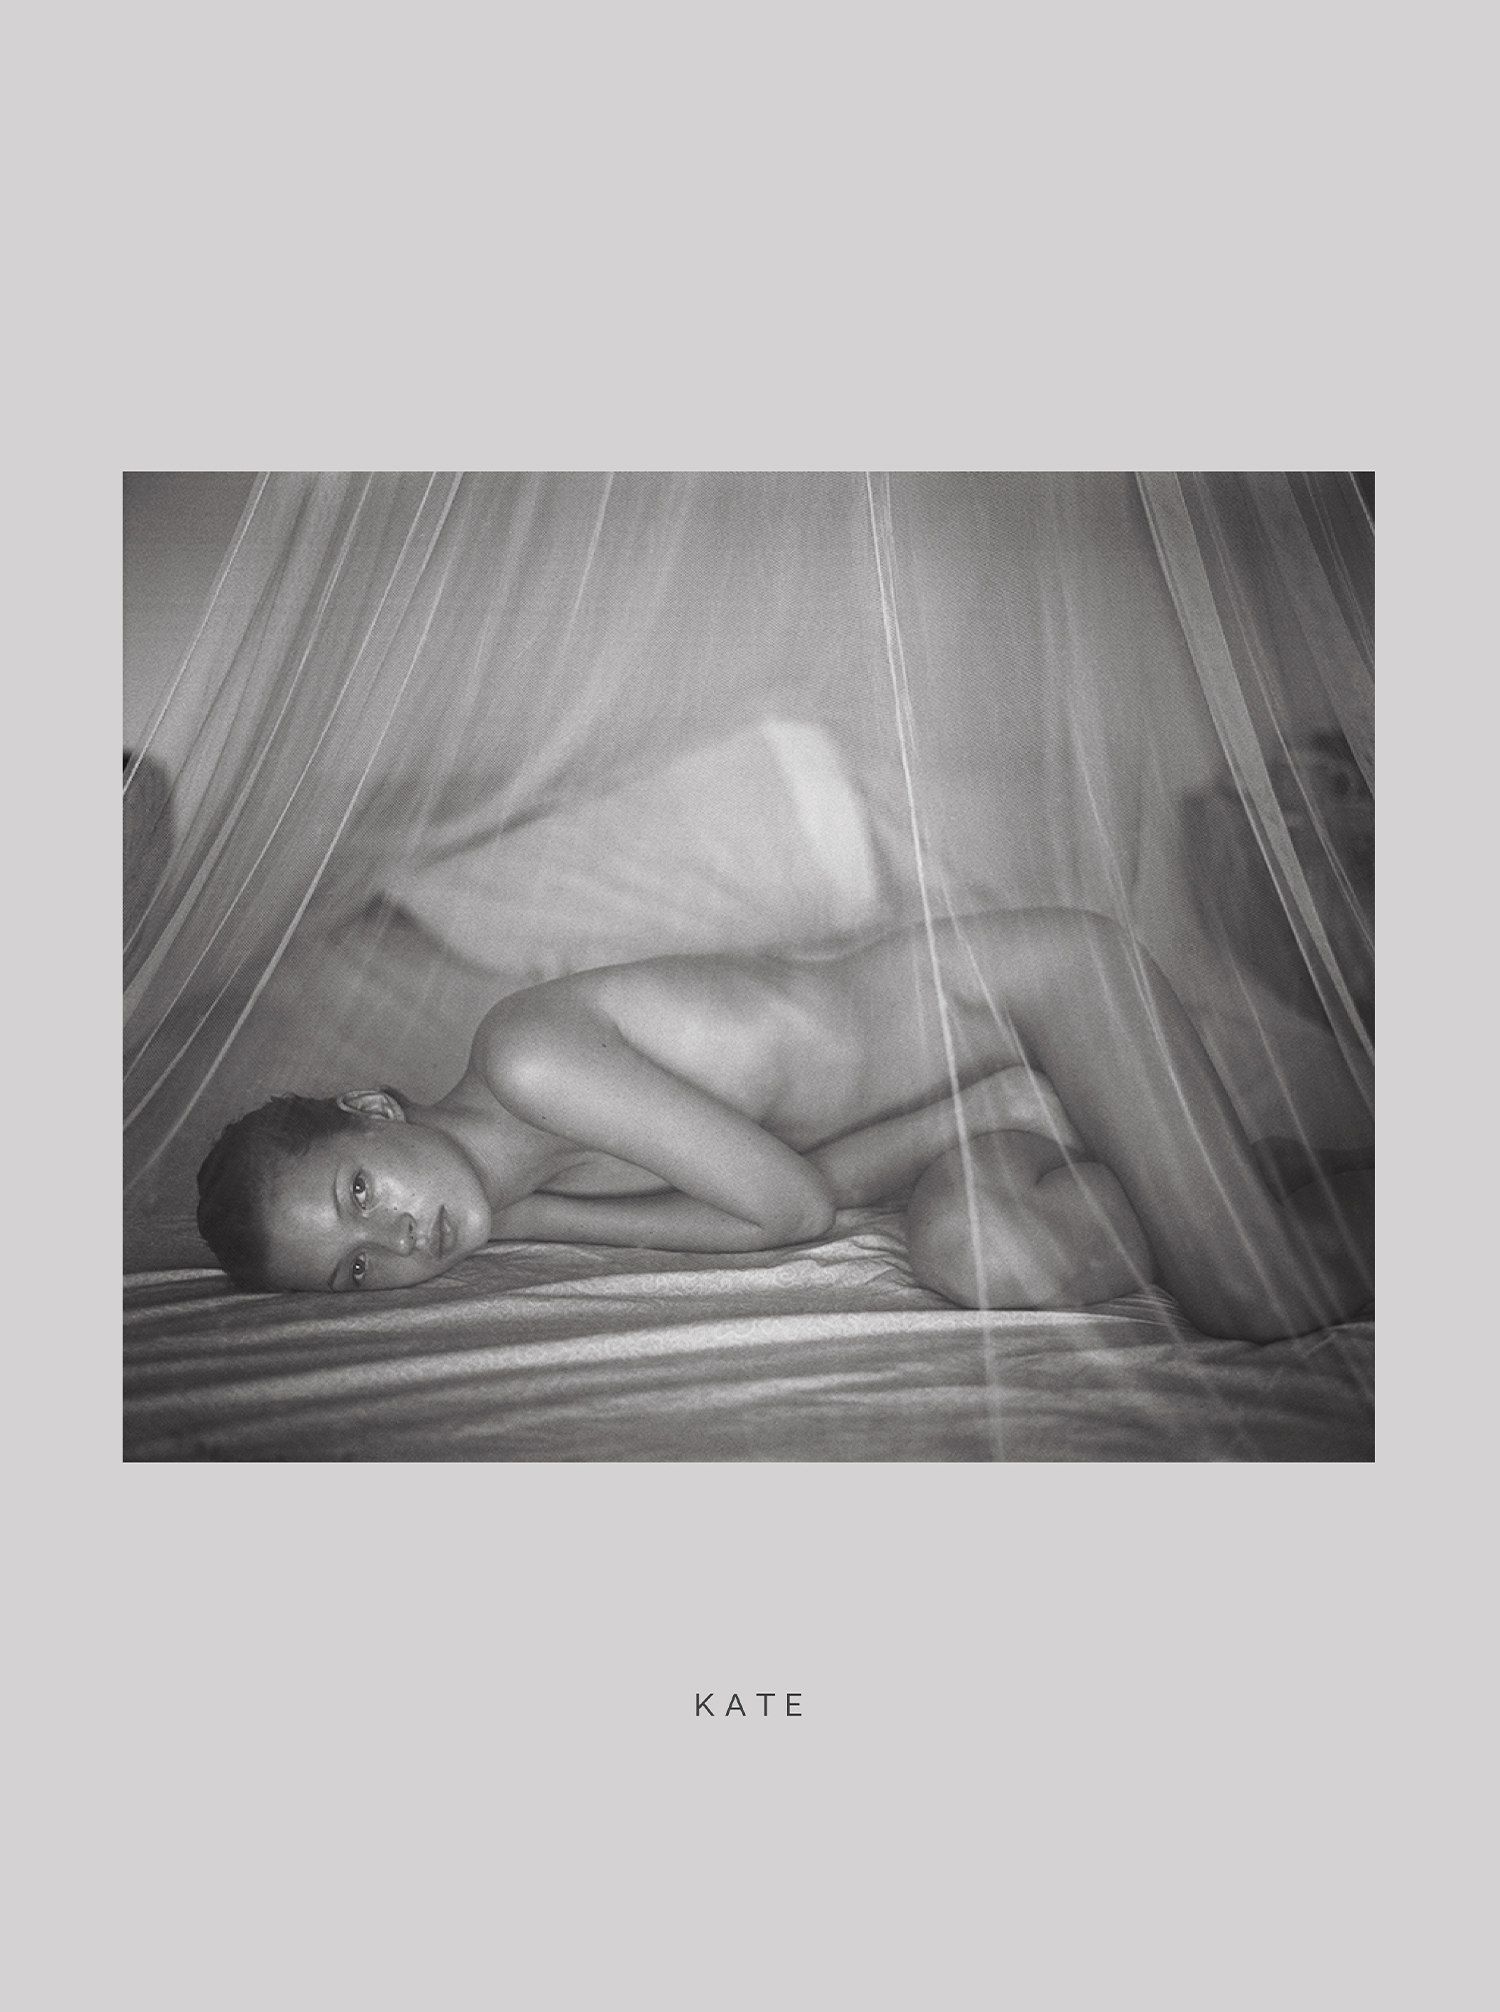 Book &quot;Kate&quot; (Kate Moss) by Mario Sorrenti Ltd. Edition of 100